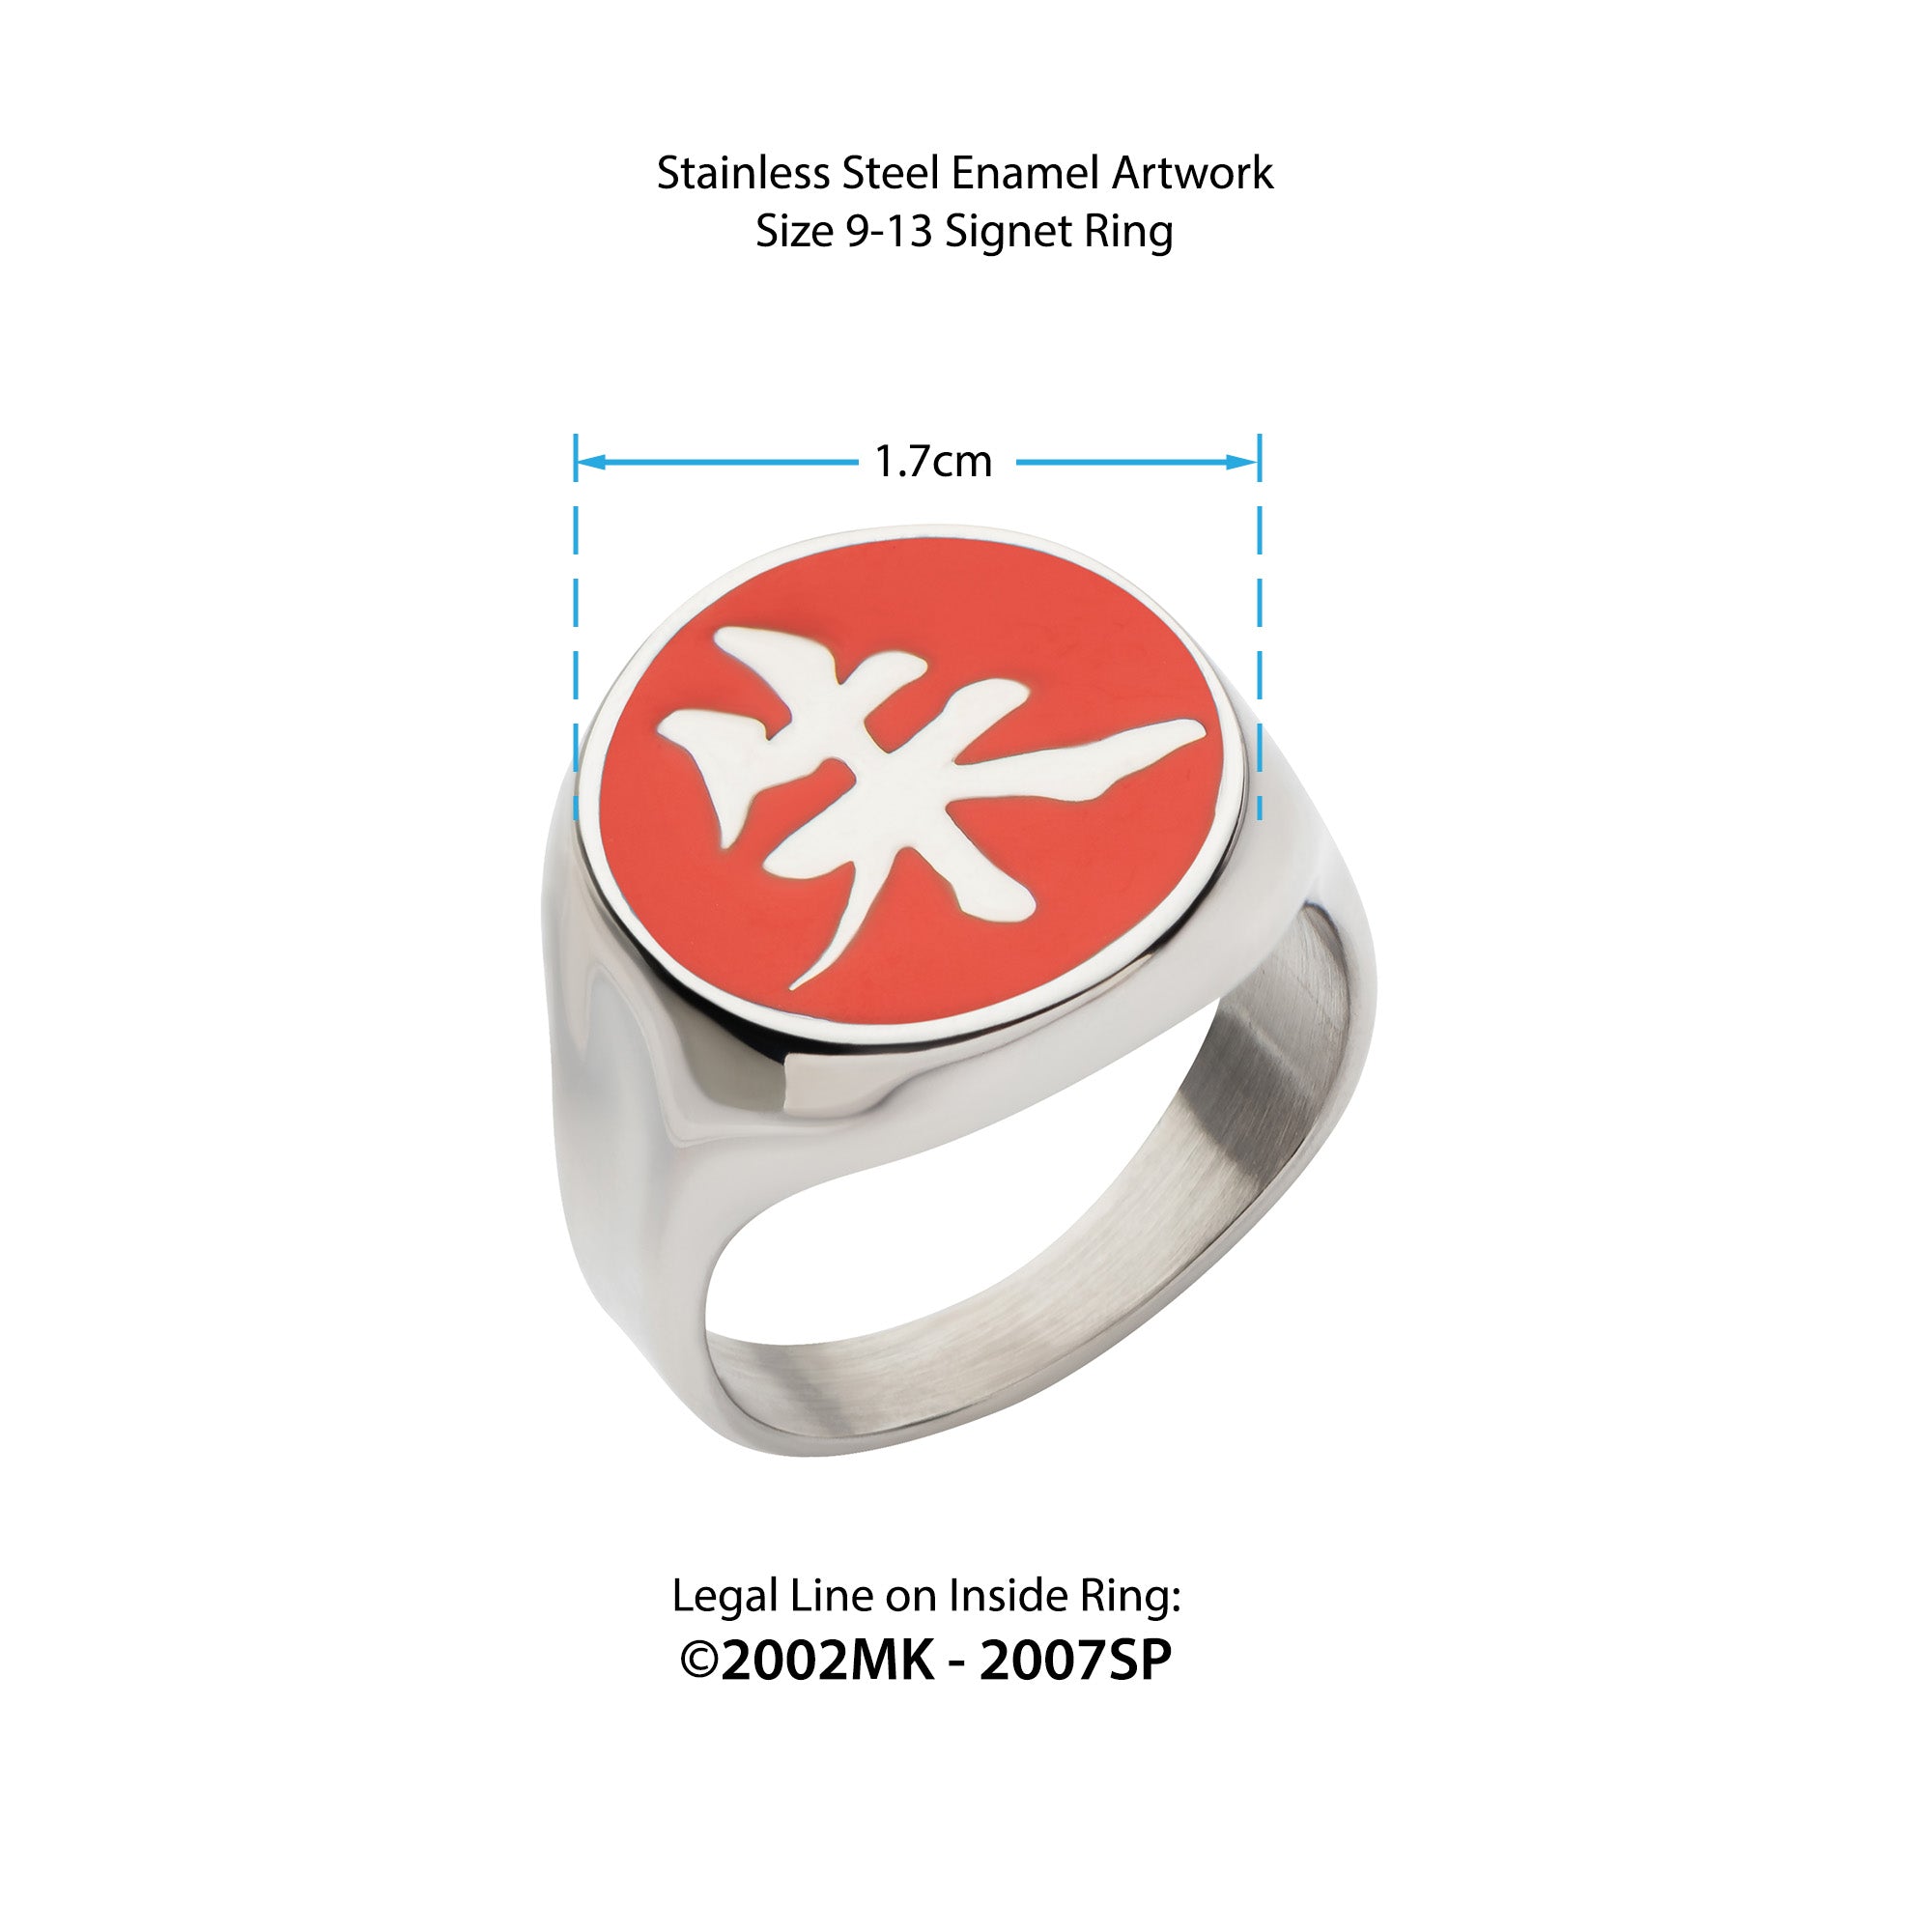 Buy Trunkin | Merchandise Akatsuki Ring Leaf Village Cosplay Set  Collectible Itachi Rings | Model 5 Online at Low Prices in India - Amazon.in